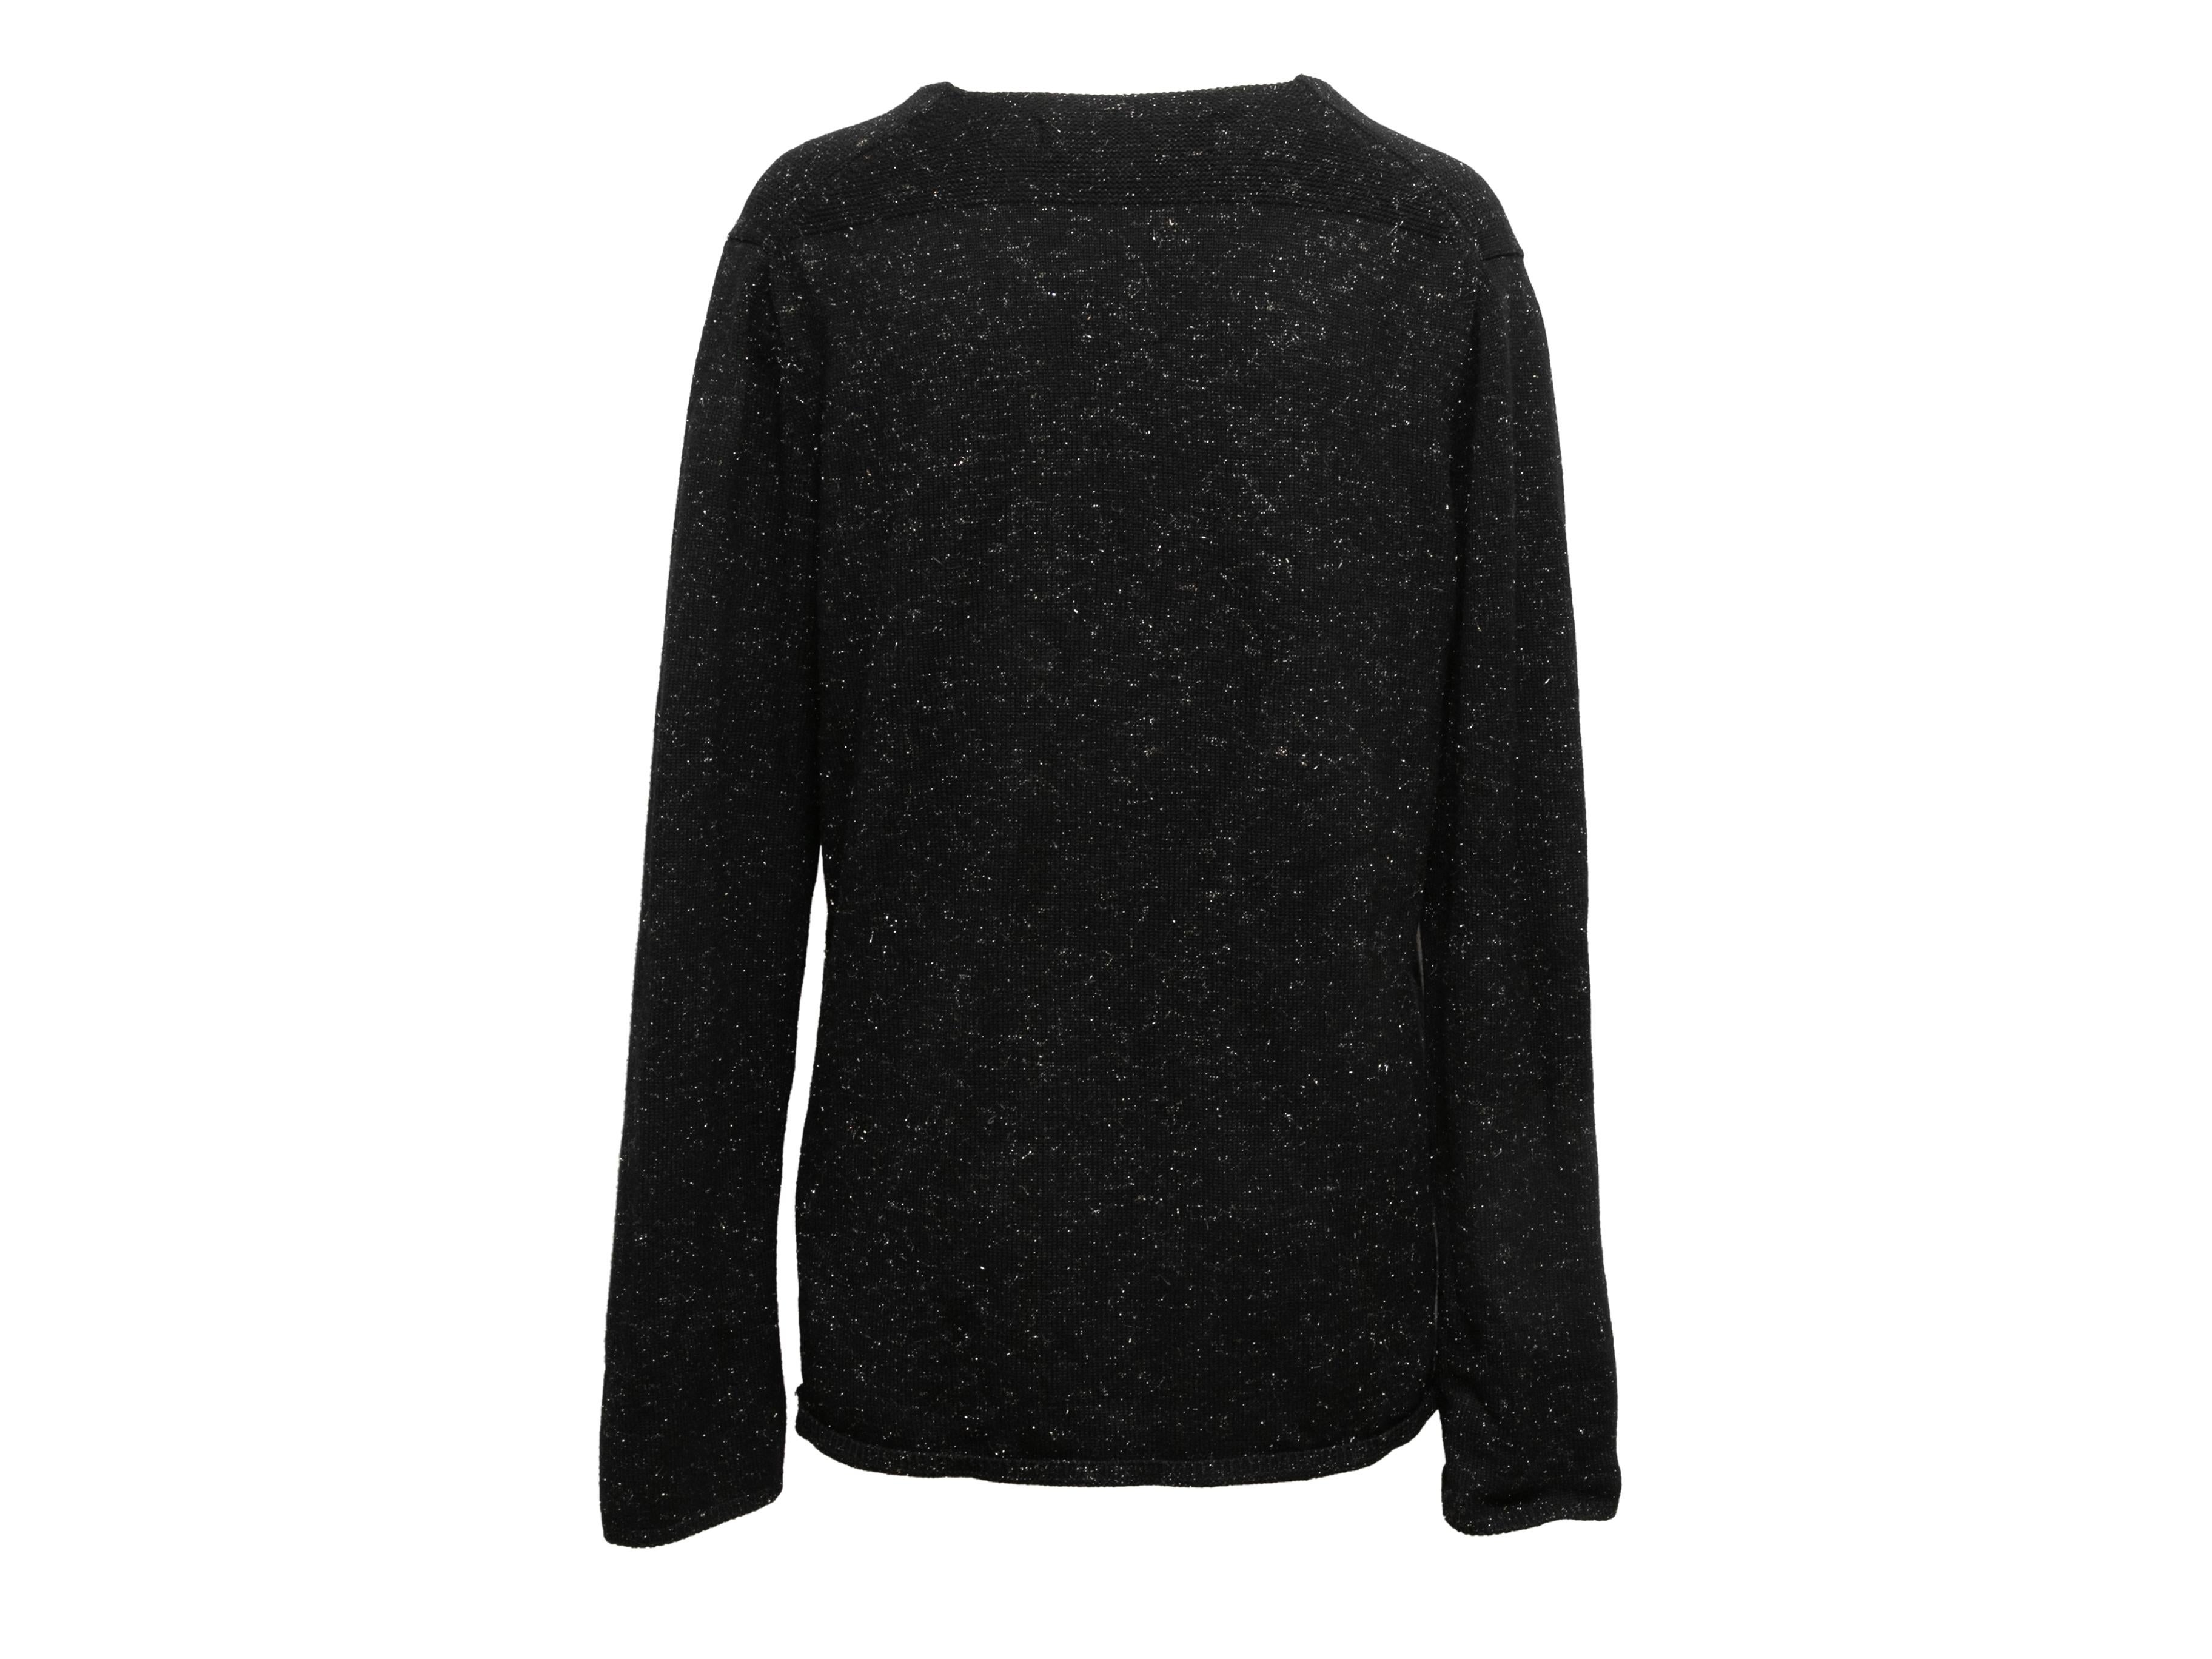 Black wool-blend metallic knit sweater by Comme Des Garcons Homme Plus. From the Fall/Winter 2014 Collection. Crew neck. 42